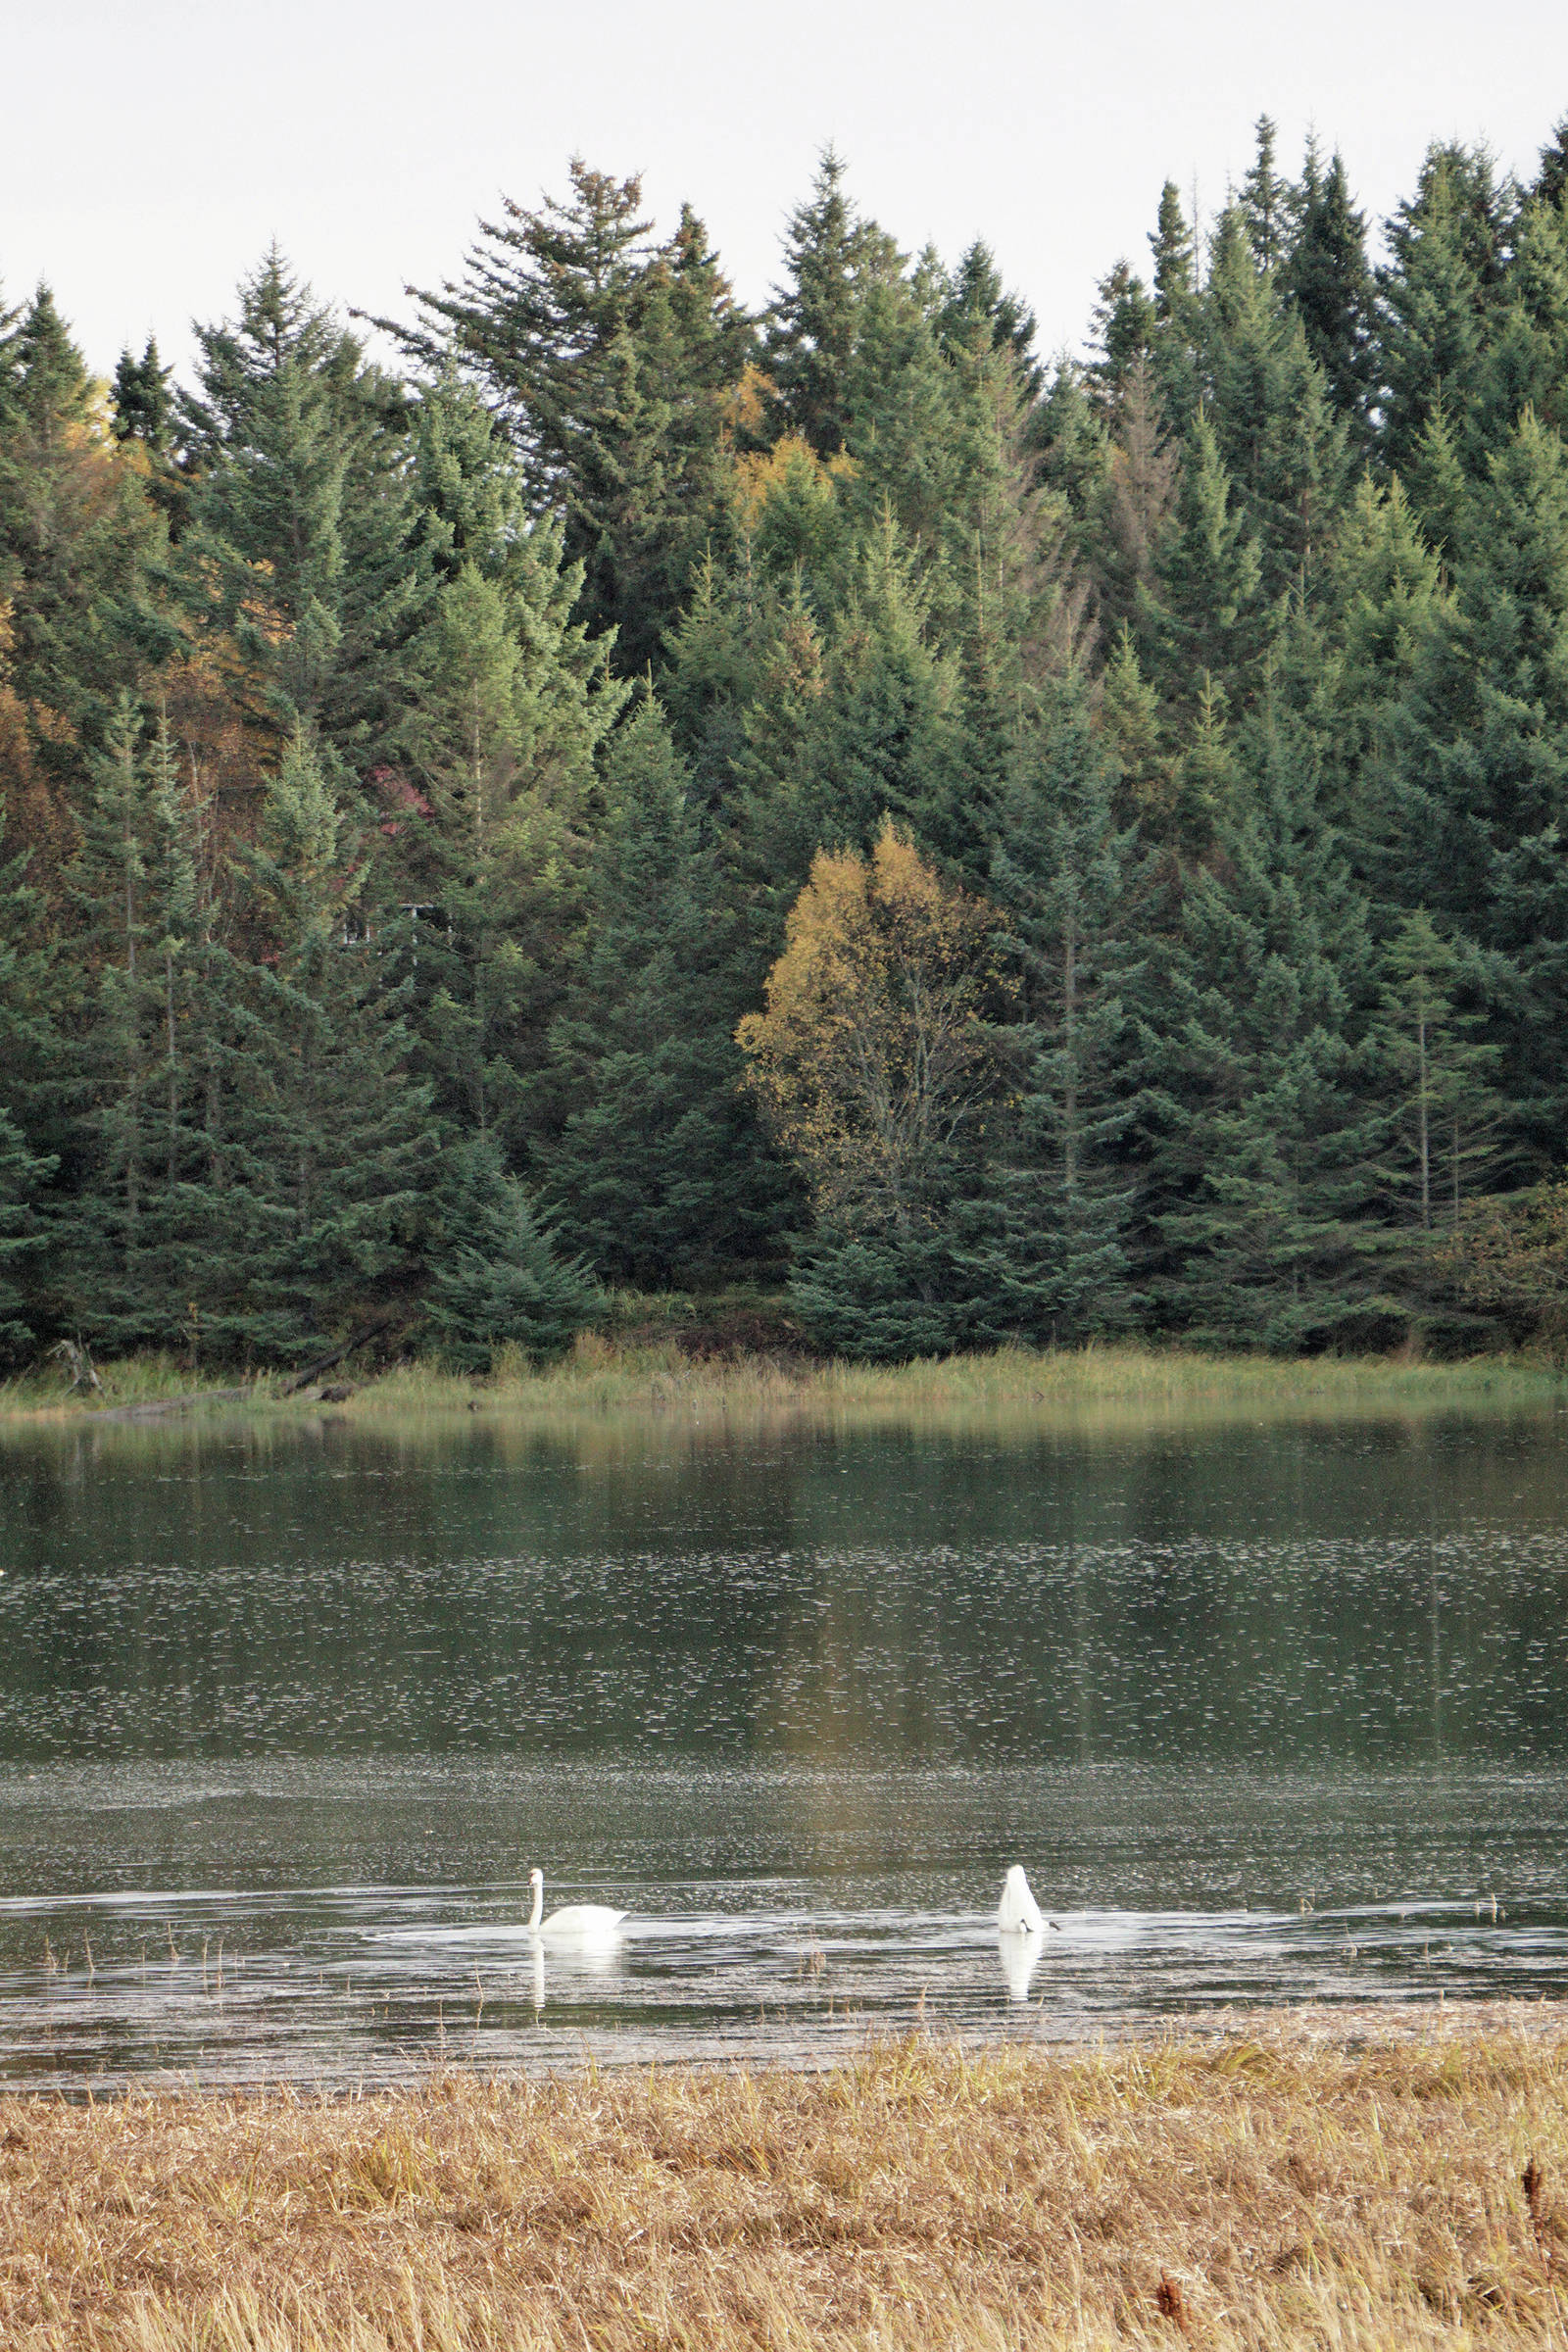 Swan lake Two swans feed on an extreme high tide of of 21.9 feet on Tuesday afternoon, Oct. 1, 2019, in Beluga Slough, Homer, Alaska. The tide flooded the slough to its shores, turning it into a lake. Homer will see an even higher tide of 22.6 feet at 3:11 p.m. Oct. 28, 2019. (Photo by Michael Armstrong/Homer News)